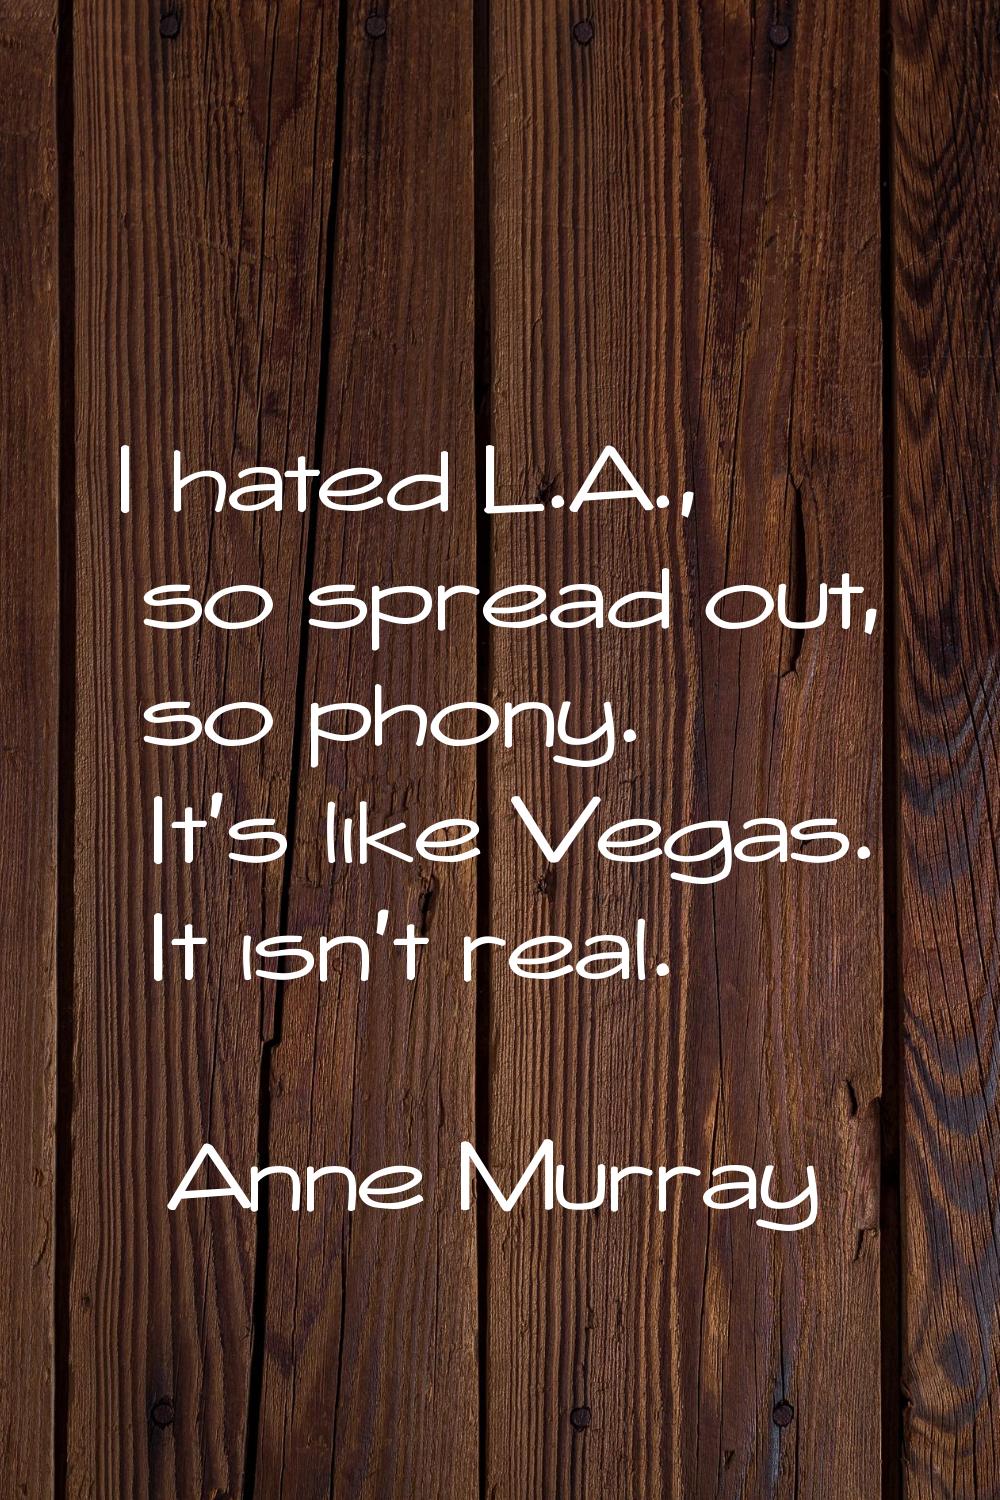 I hated L.A., so spread out, so phony. It's like Vegas. It isn't real.